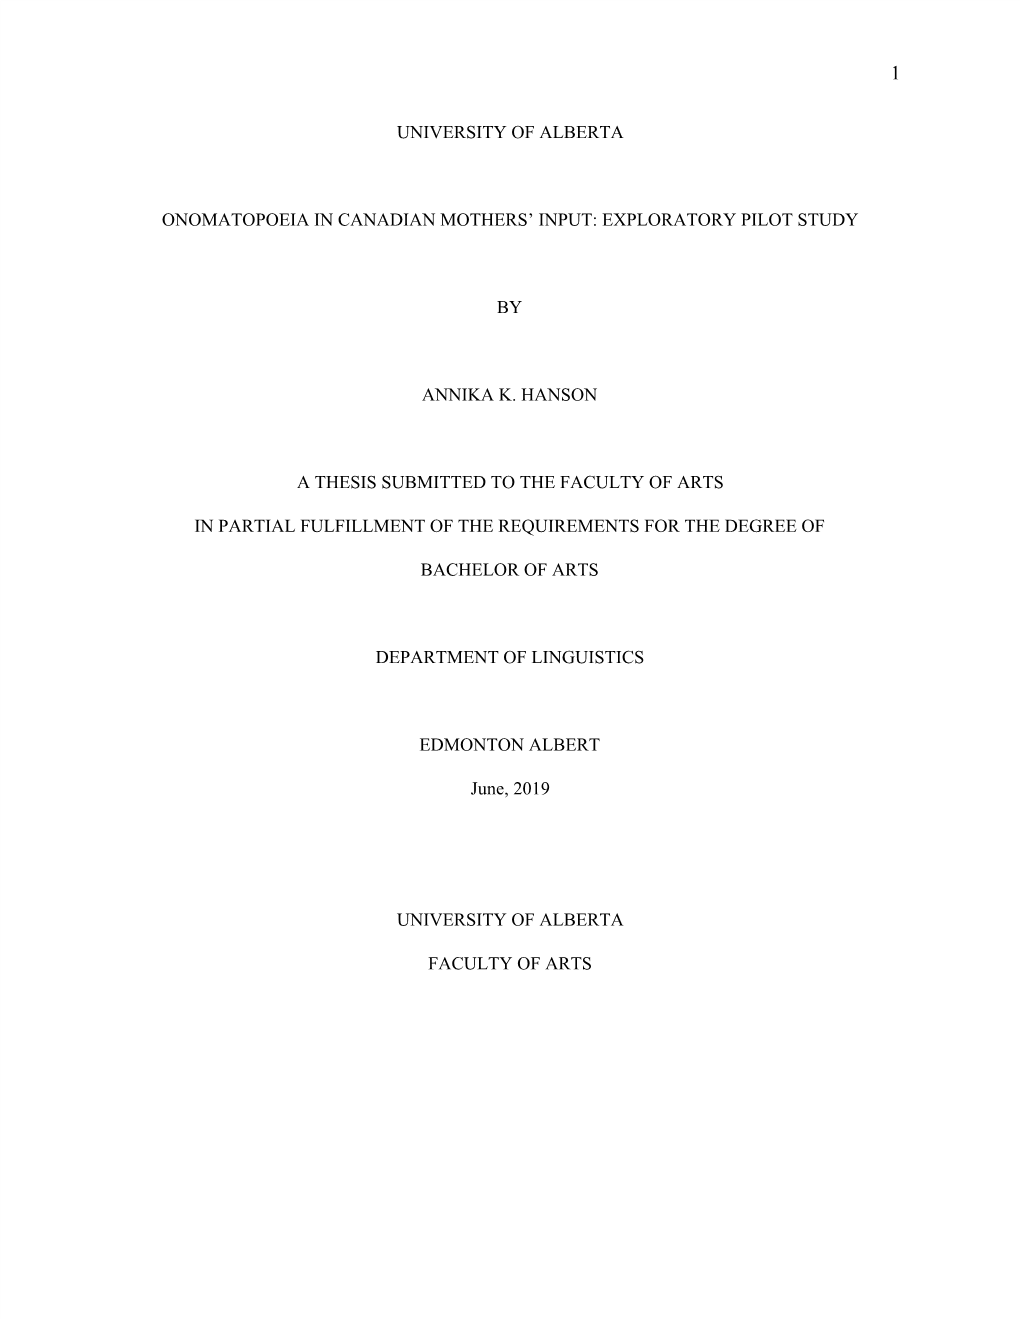 University of Alberta Onomatopoeia in Canadian Mothers' Input: Exploratory Pilot Study by Annika K. Hanson a Thesis Submit